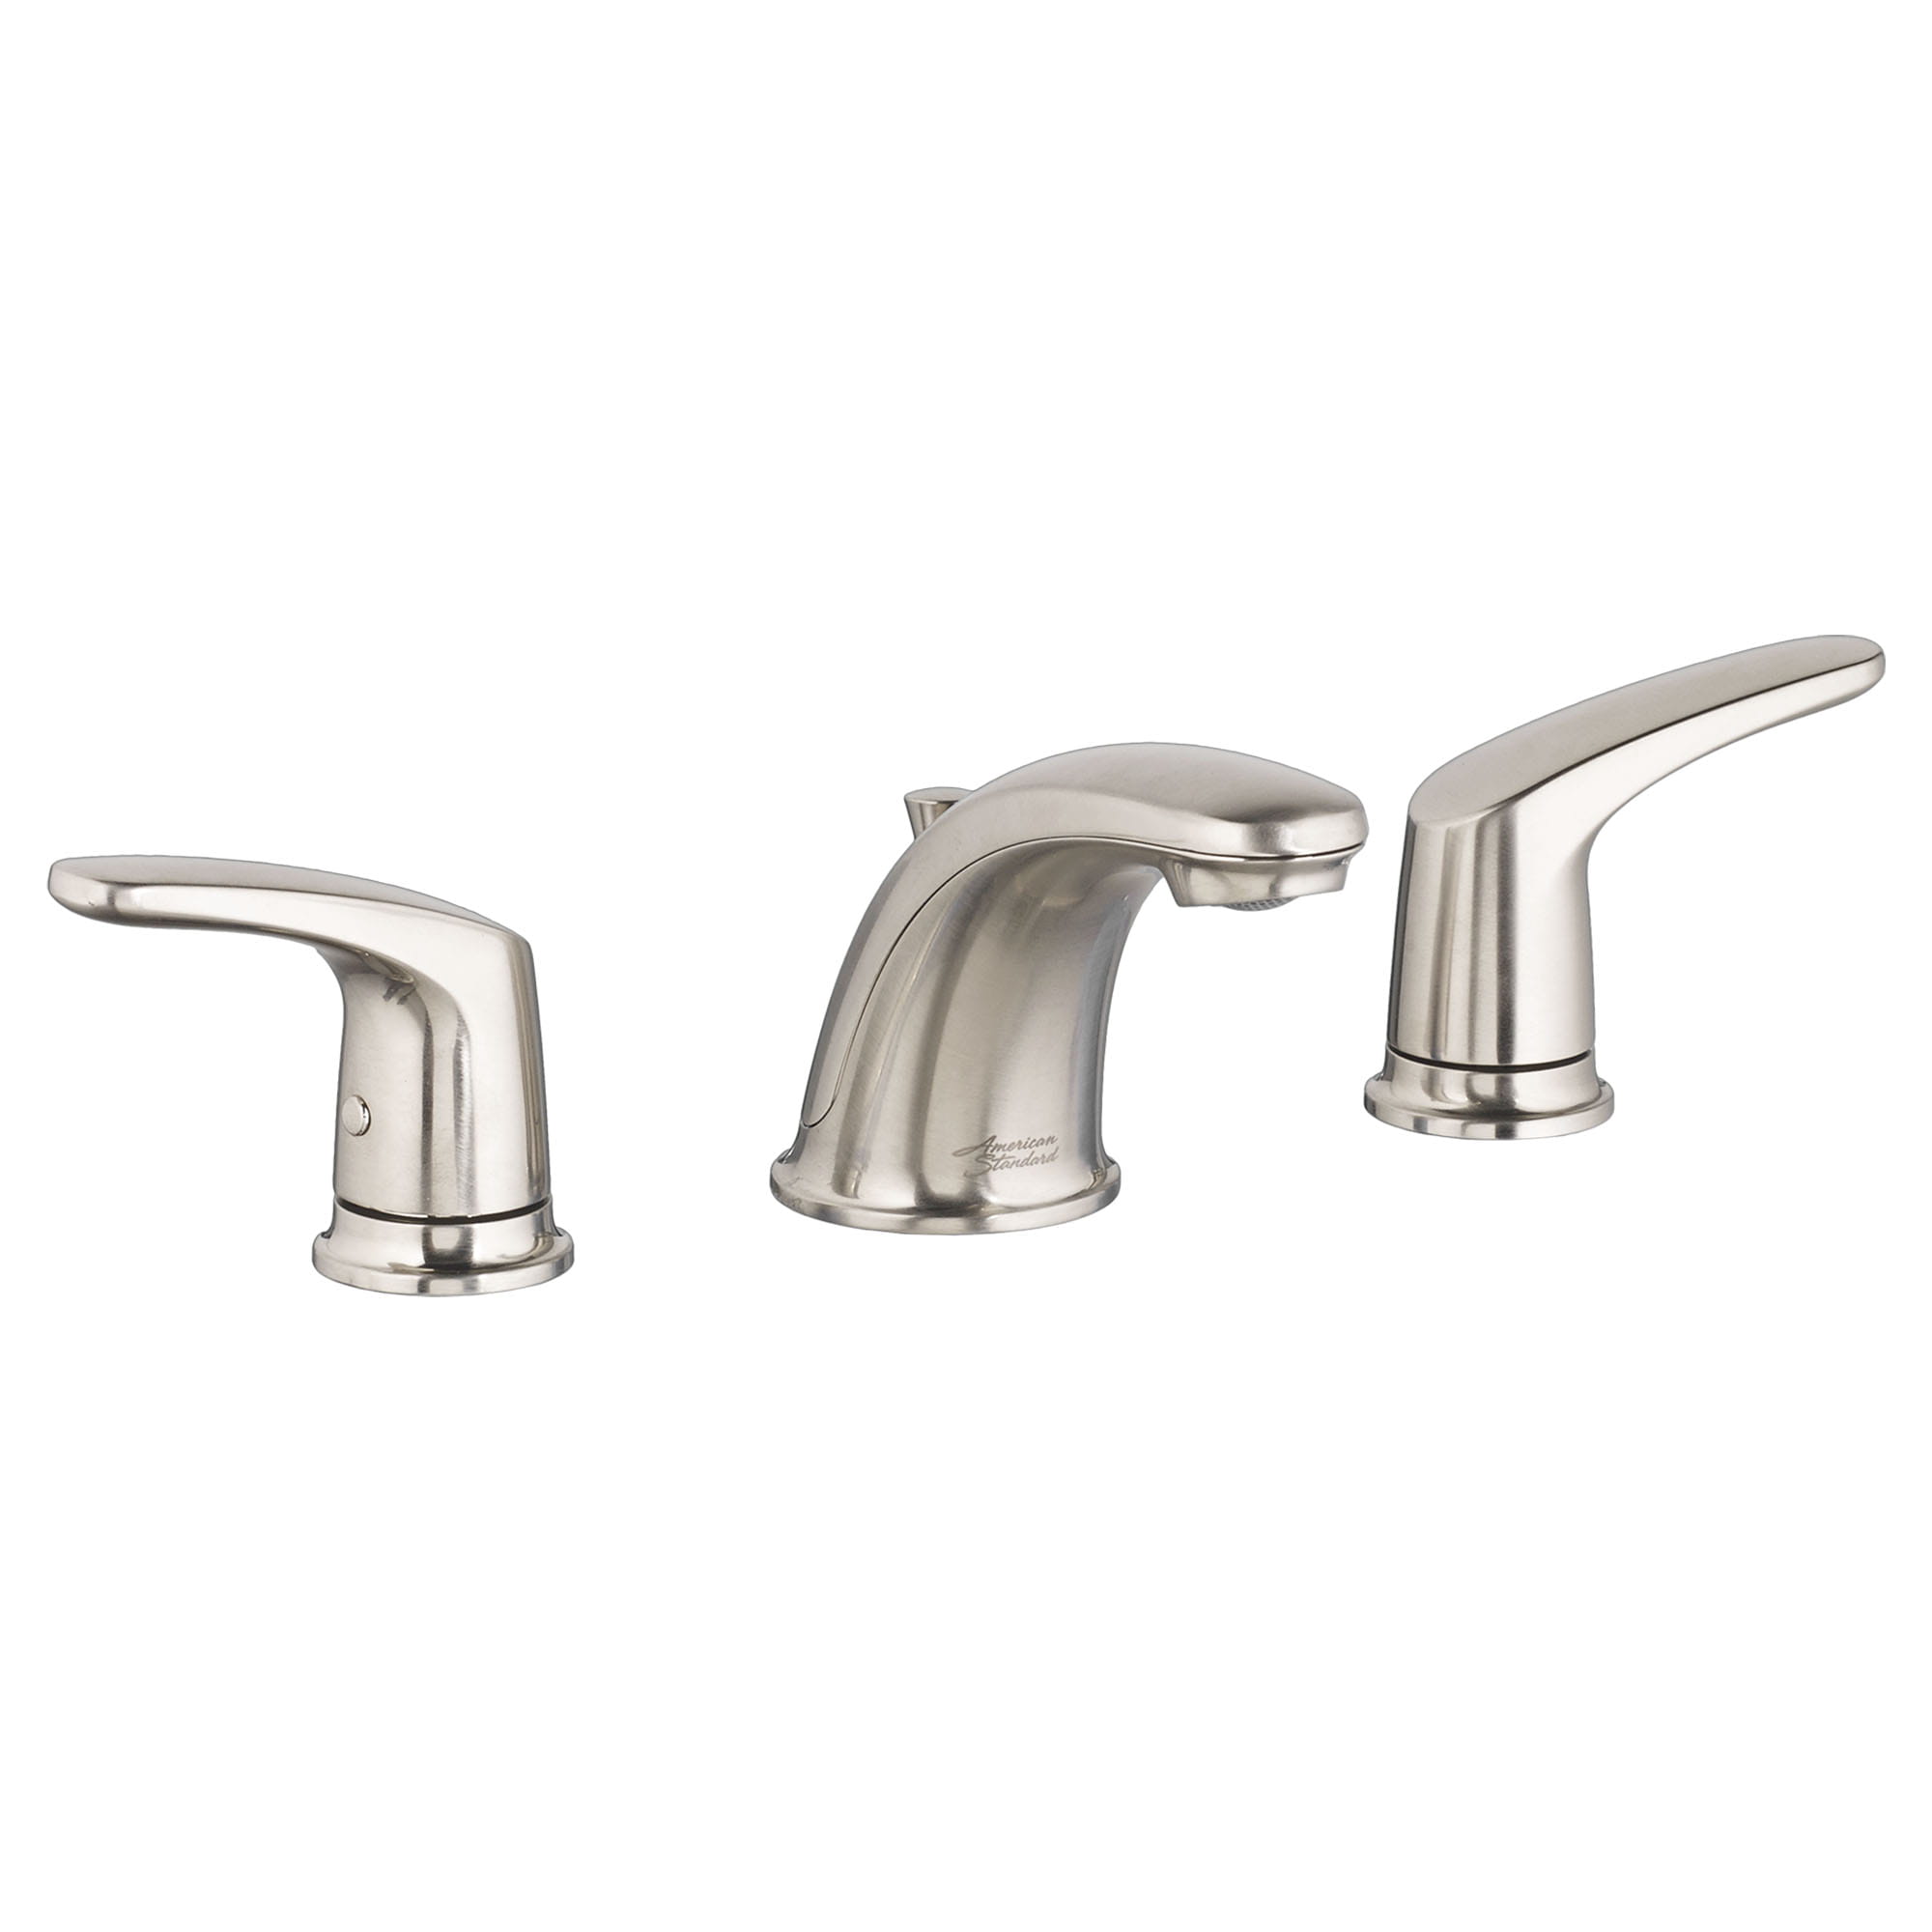 Colony® PRO 8-Inch Widespread 2-Handle Bathroom Faucet 1.2 gpm/4.5 L/min With Lever Handles